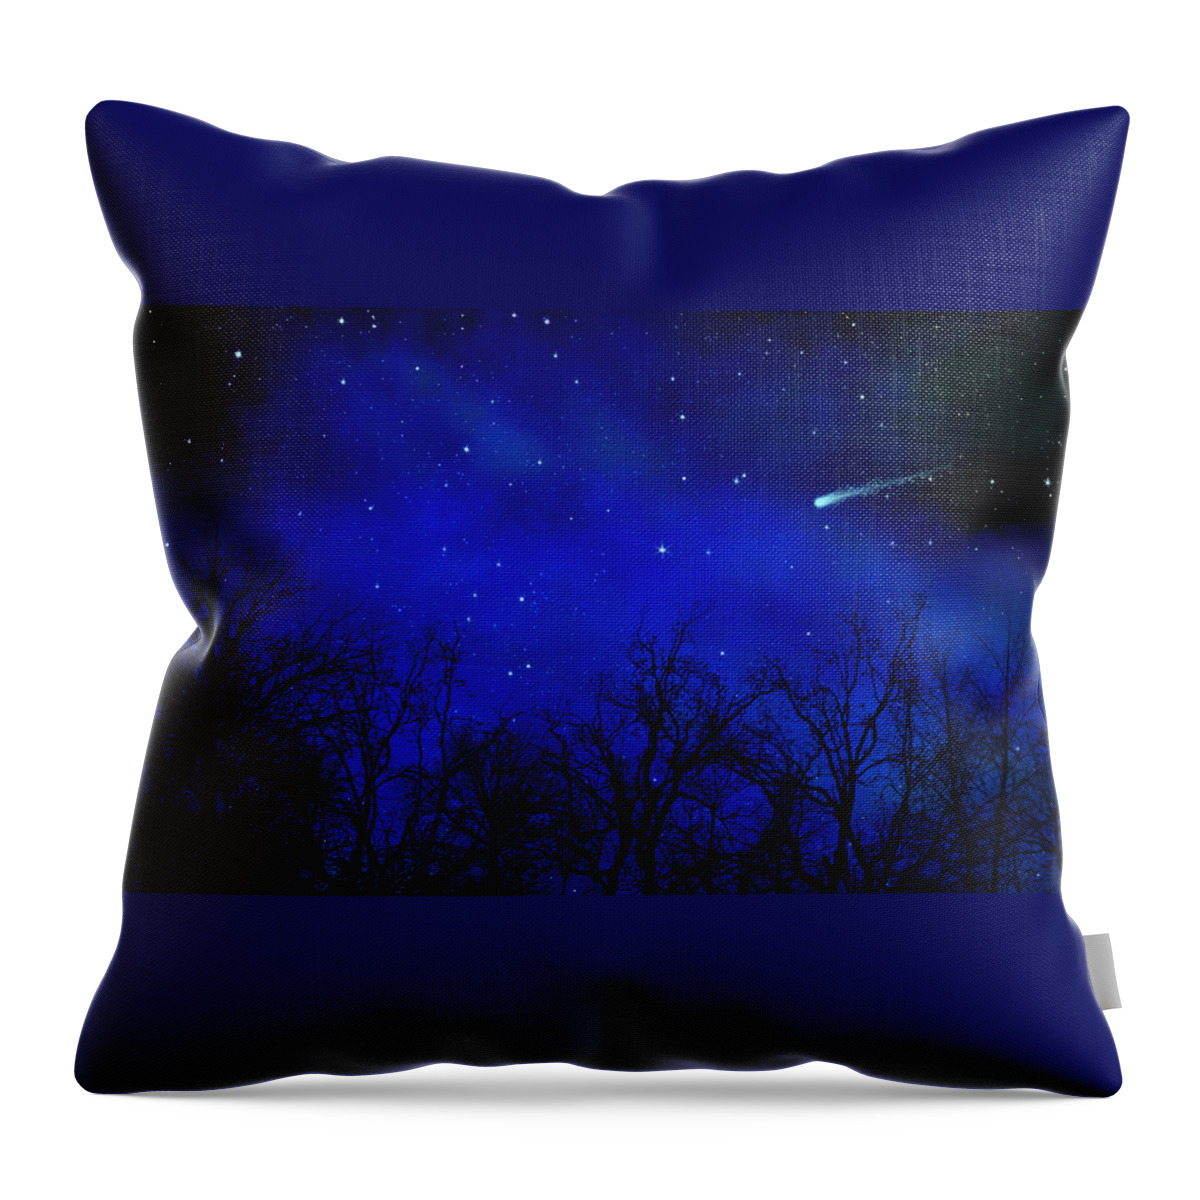 Above The Treetops Mural Throw Pillow featuring the painting Above The Treetops Wall Mural by Frank Wilson